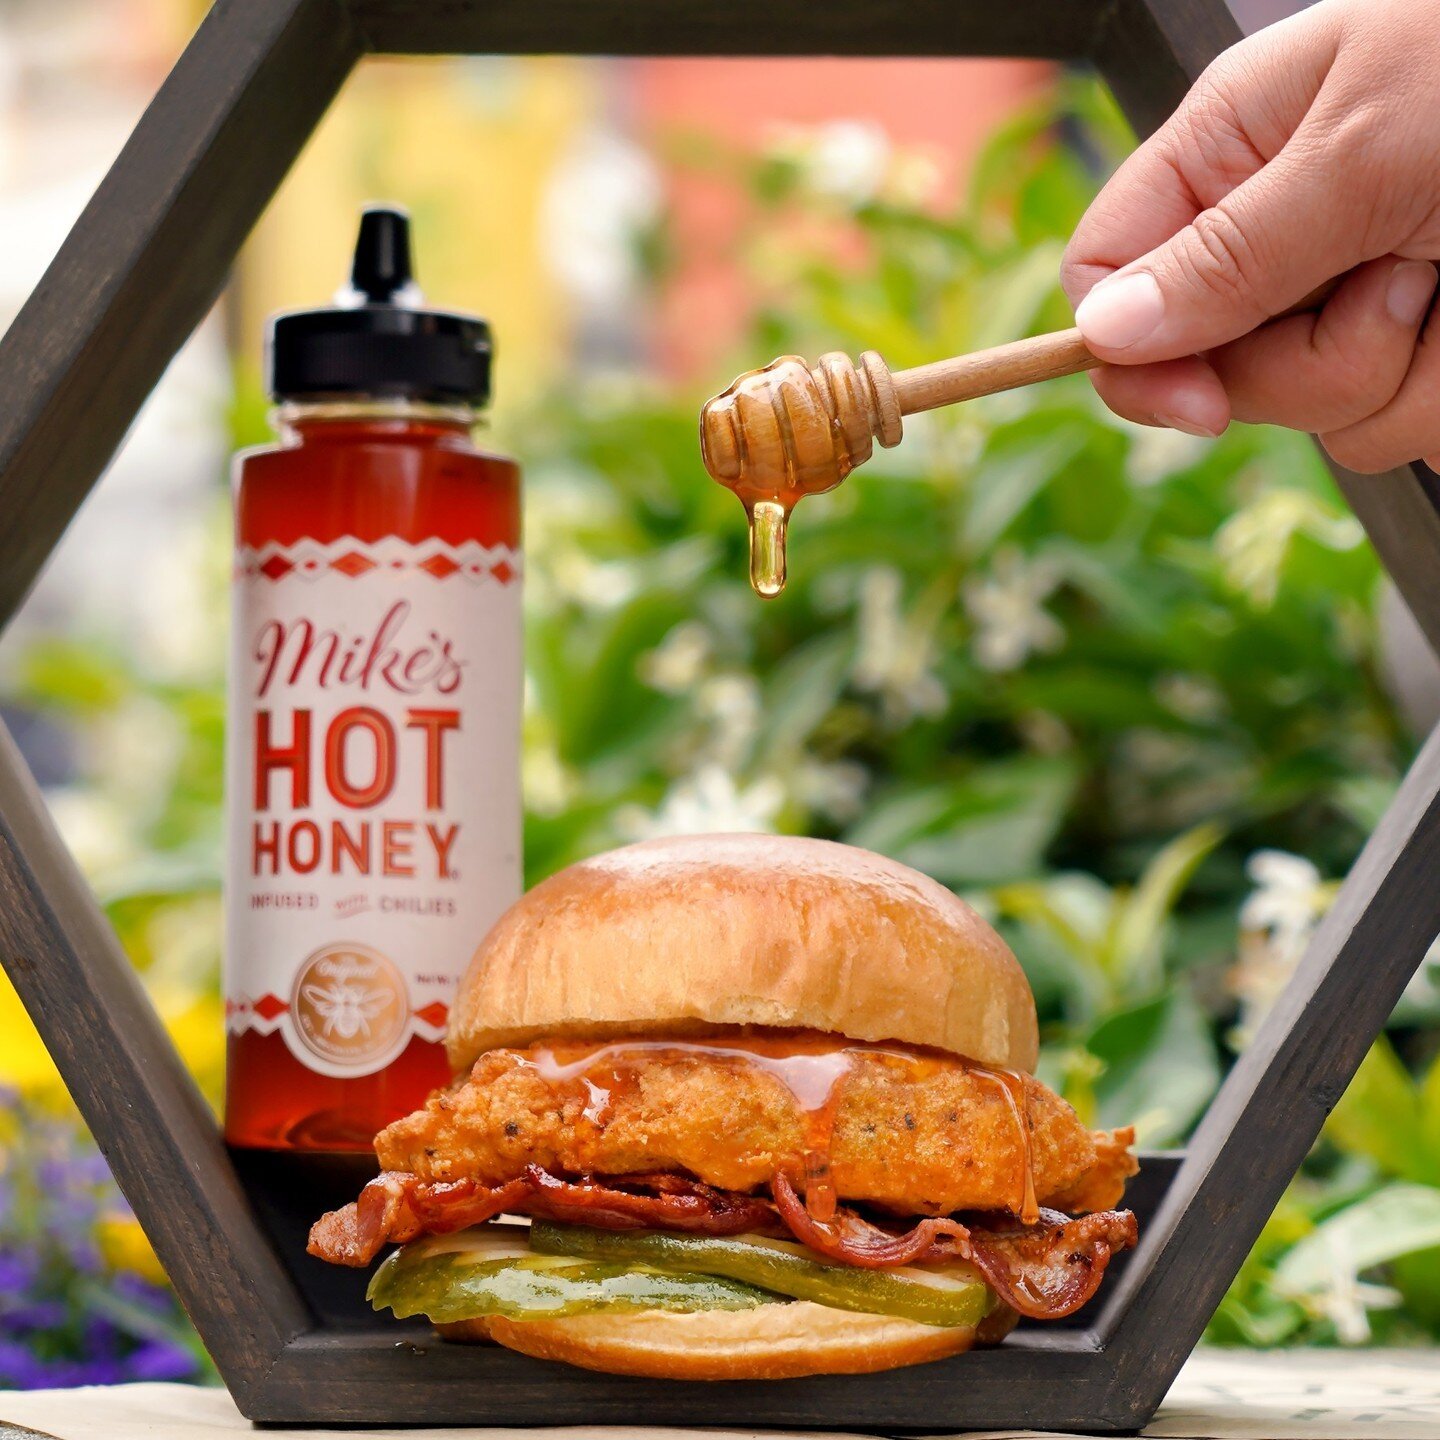 A chicken sandwich with a taste that's un-bee-lievable 😉🐝 Try our all-new Mike's Hot Honey Crispy Chicken Sandwich now at your local Elevation Burger for a limited time!

The Mike's Hot Honey Crispy Chicken Sandwich is available for a limited time 